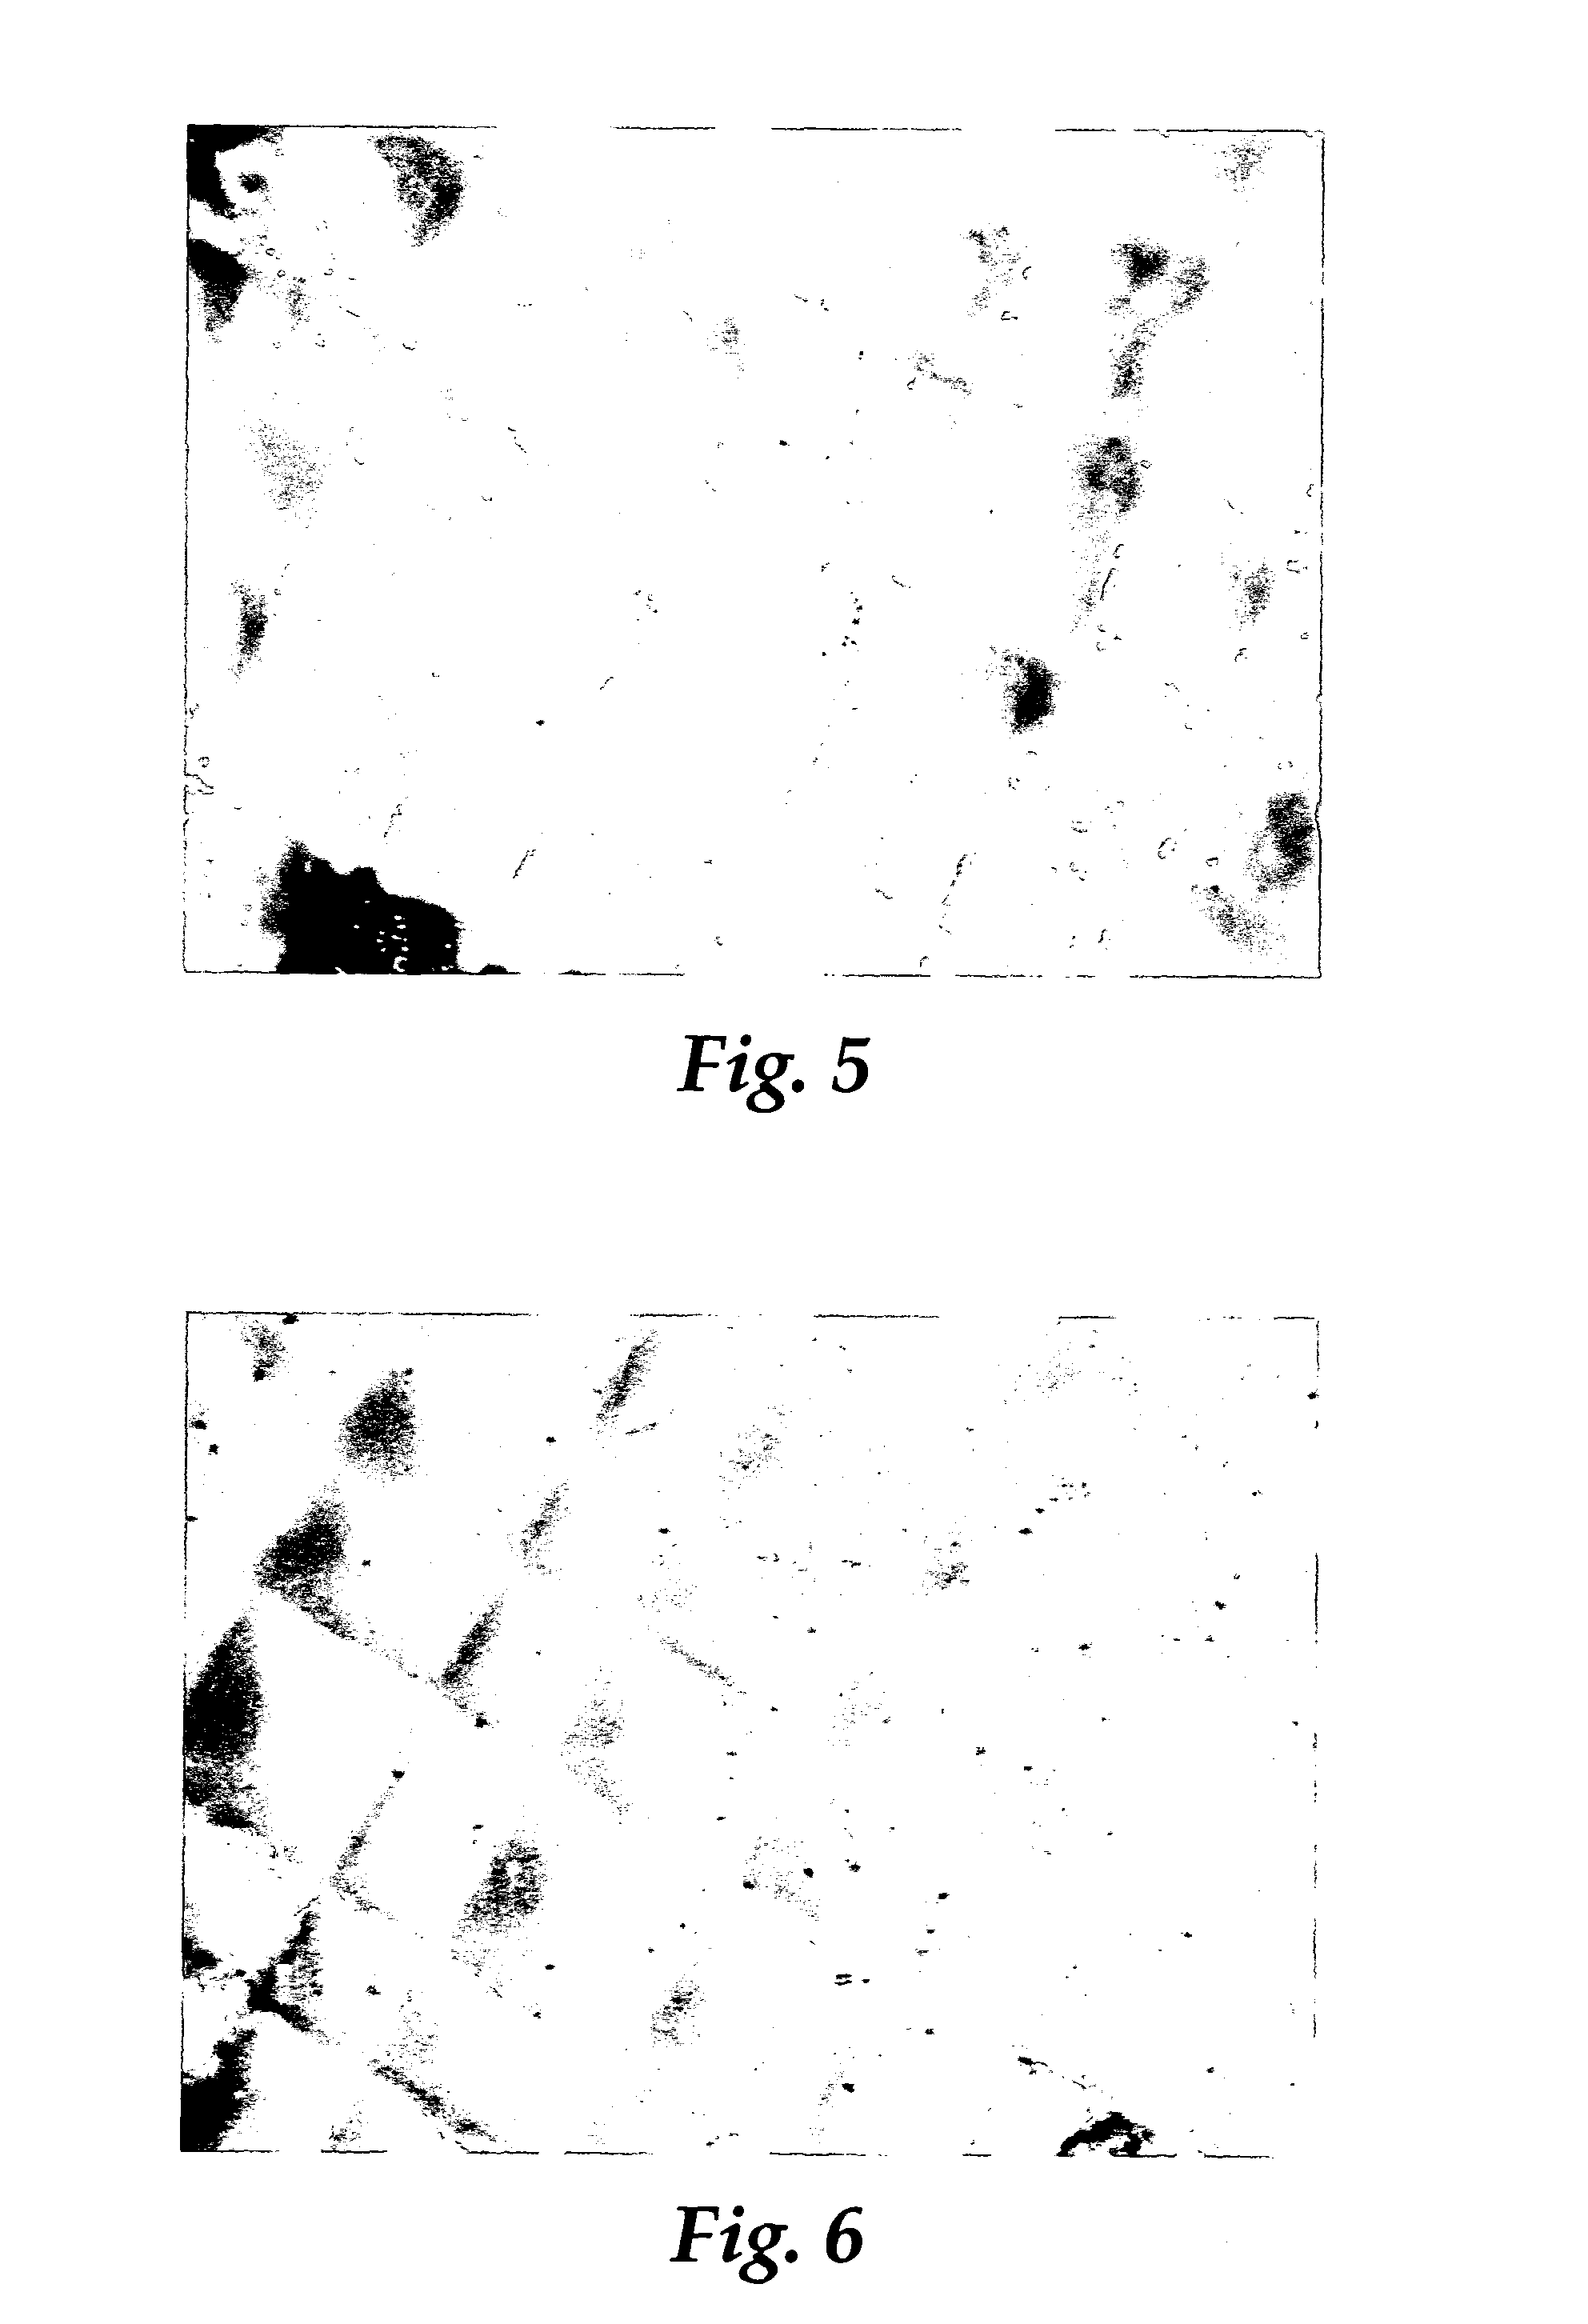 Compositions for abrasive articles